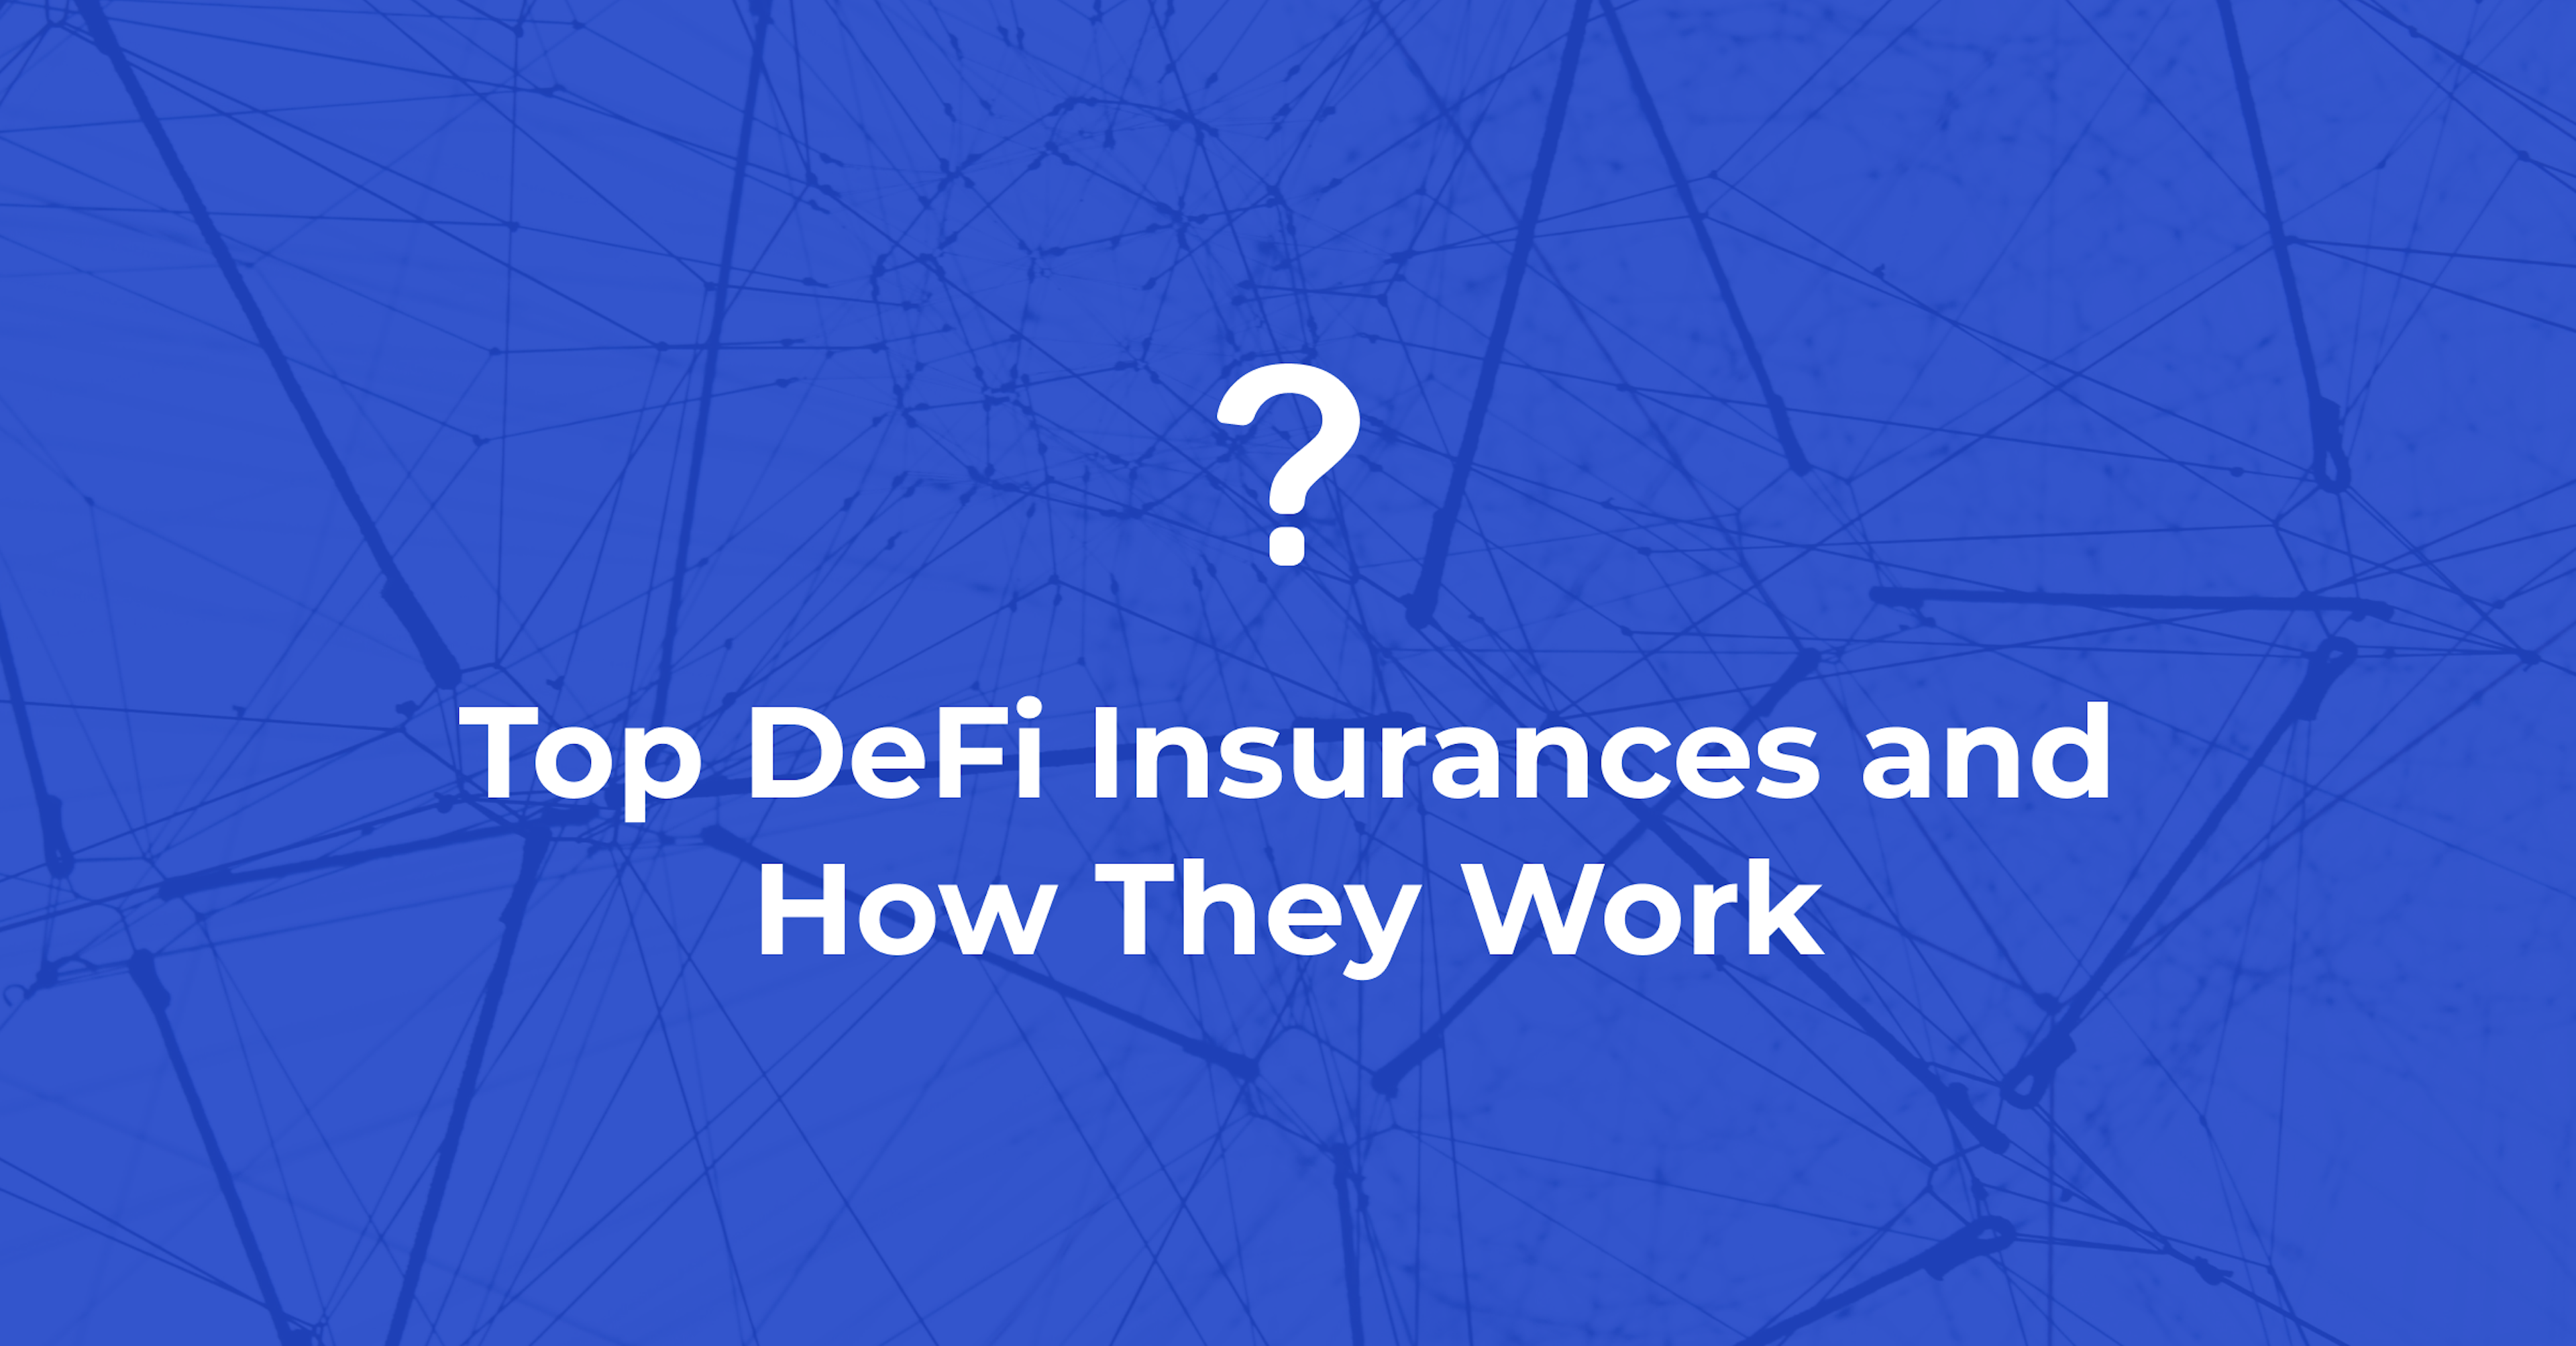 Top DeFi Insurances and How They Work